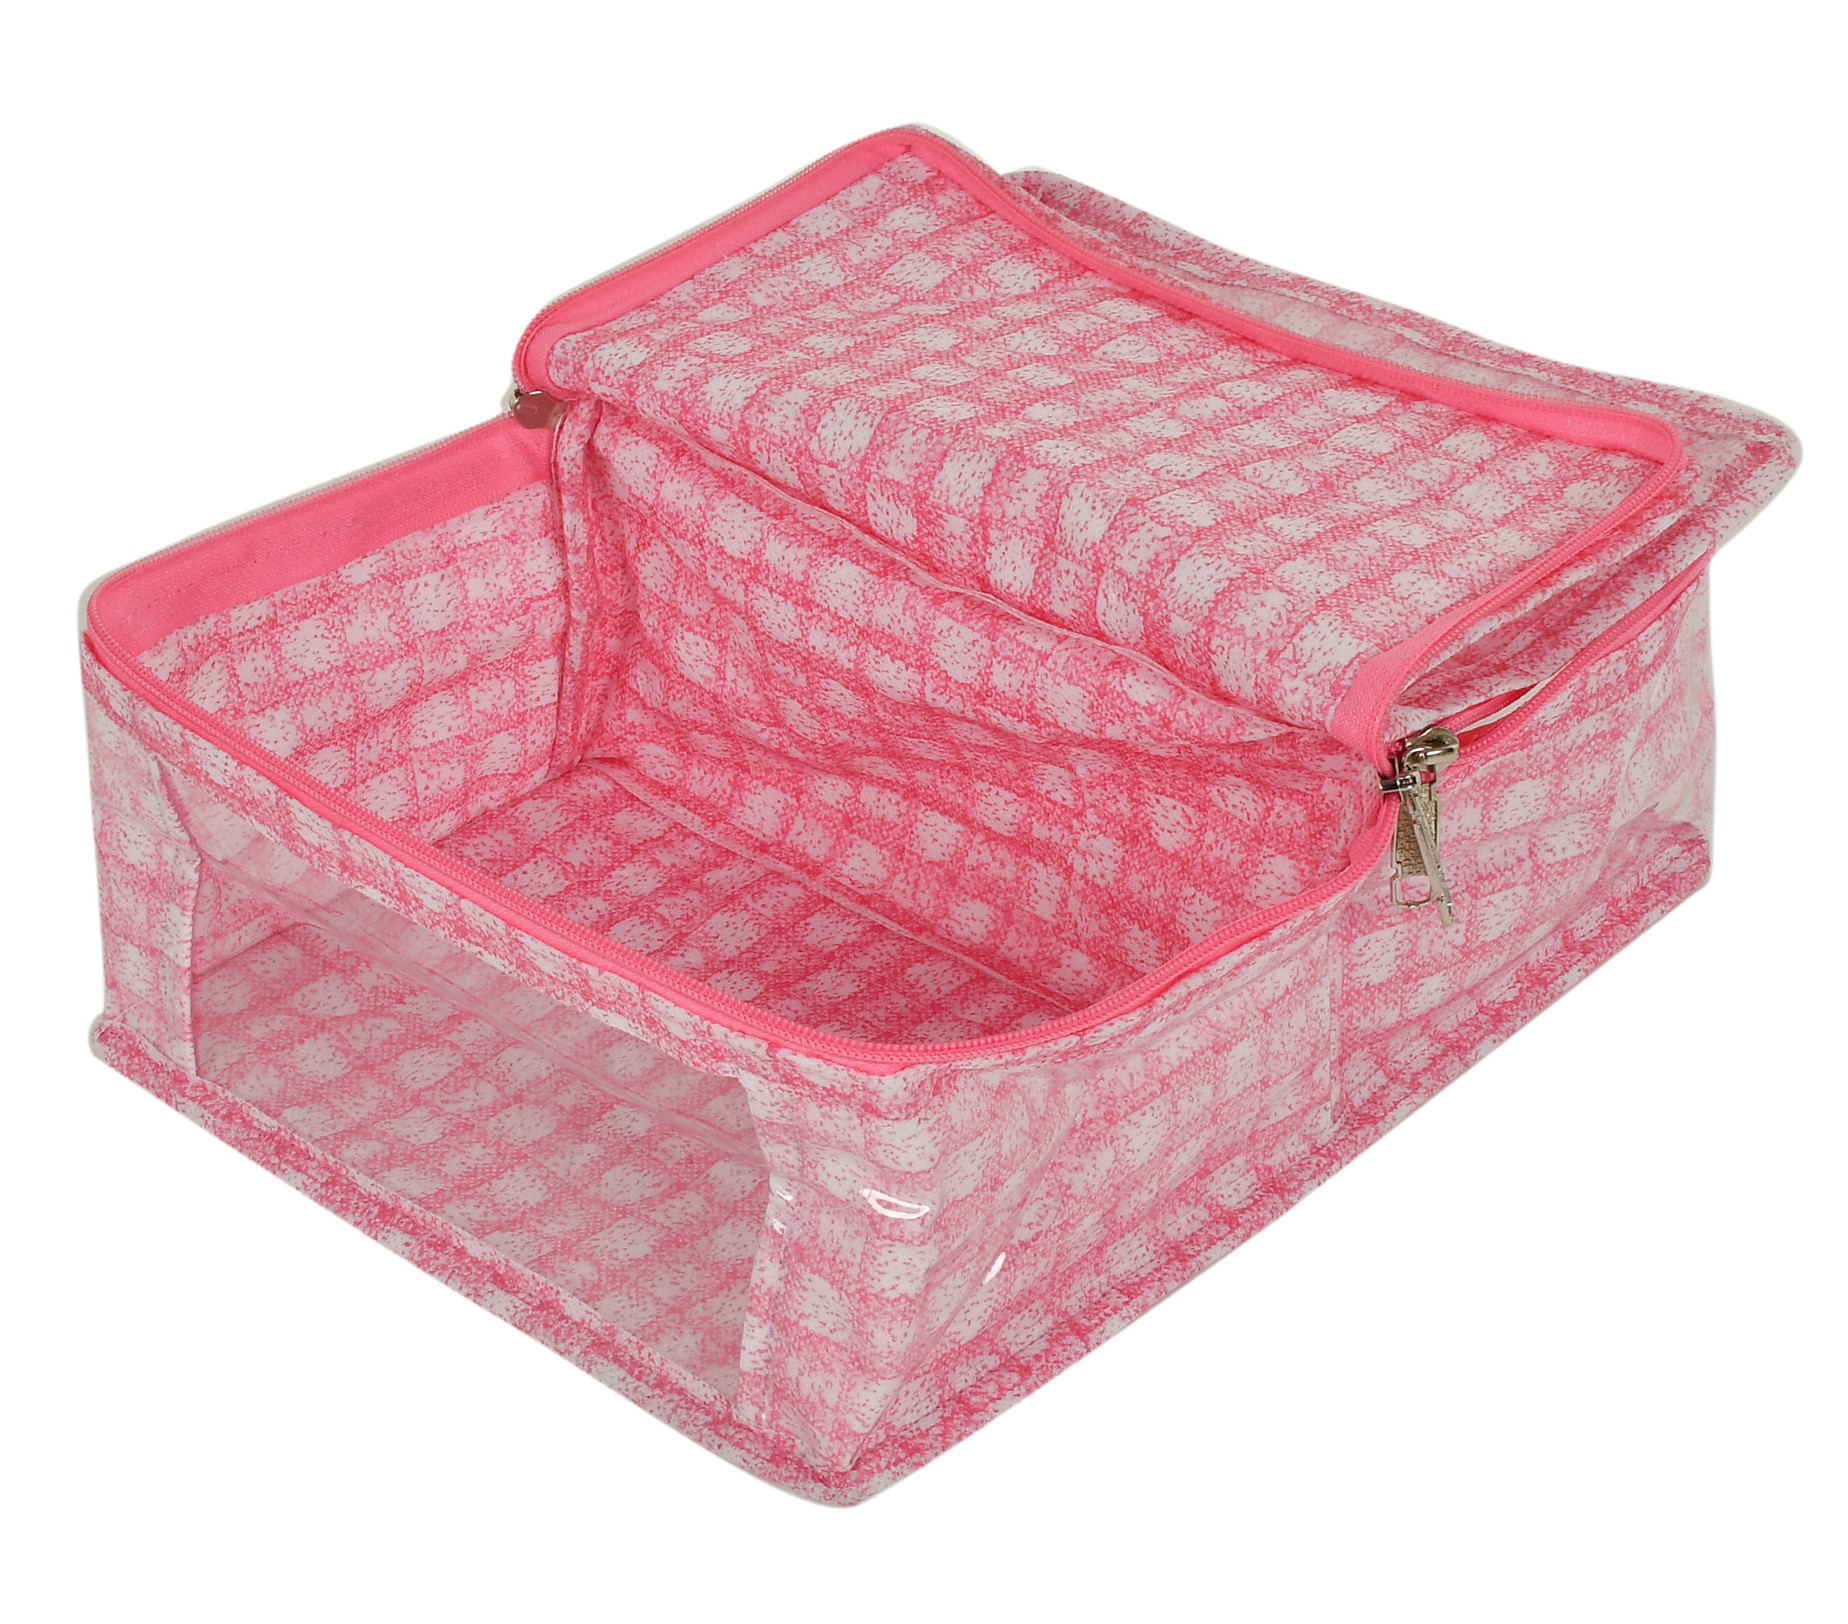 Kuber Industries Check Design Laminated PVC 2 Compartment Undergarments Organizer Bag, Storage Bag  Fits All Size Undergarments, Socks, Cosmetic, Toiletry kit With Tranasparent Window (Pink)-HS_38_KUBMART21269